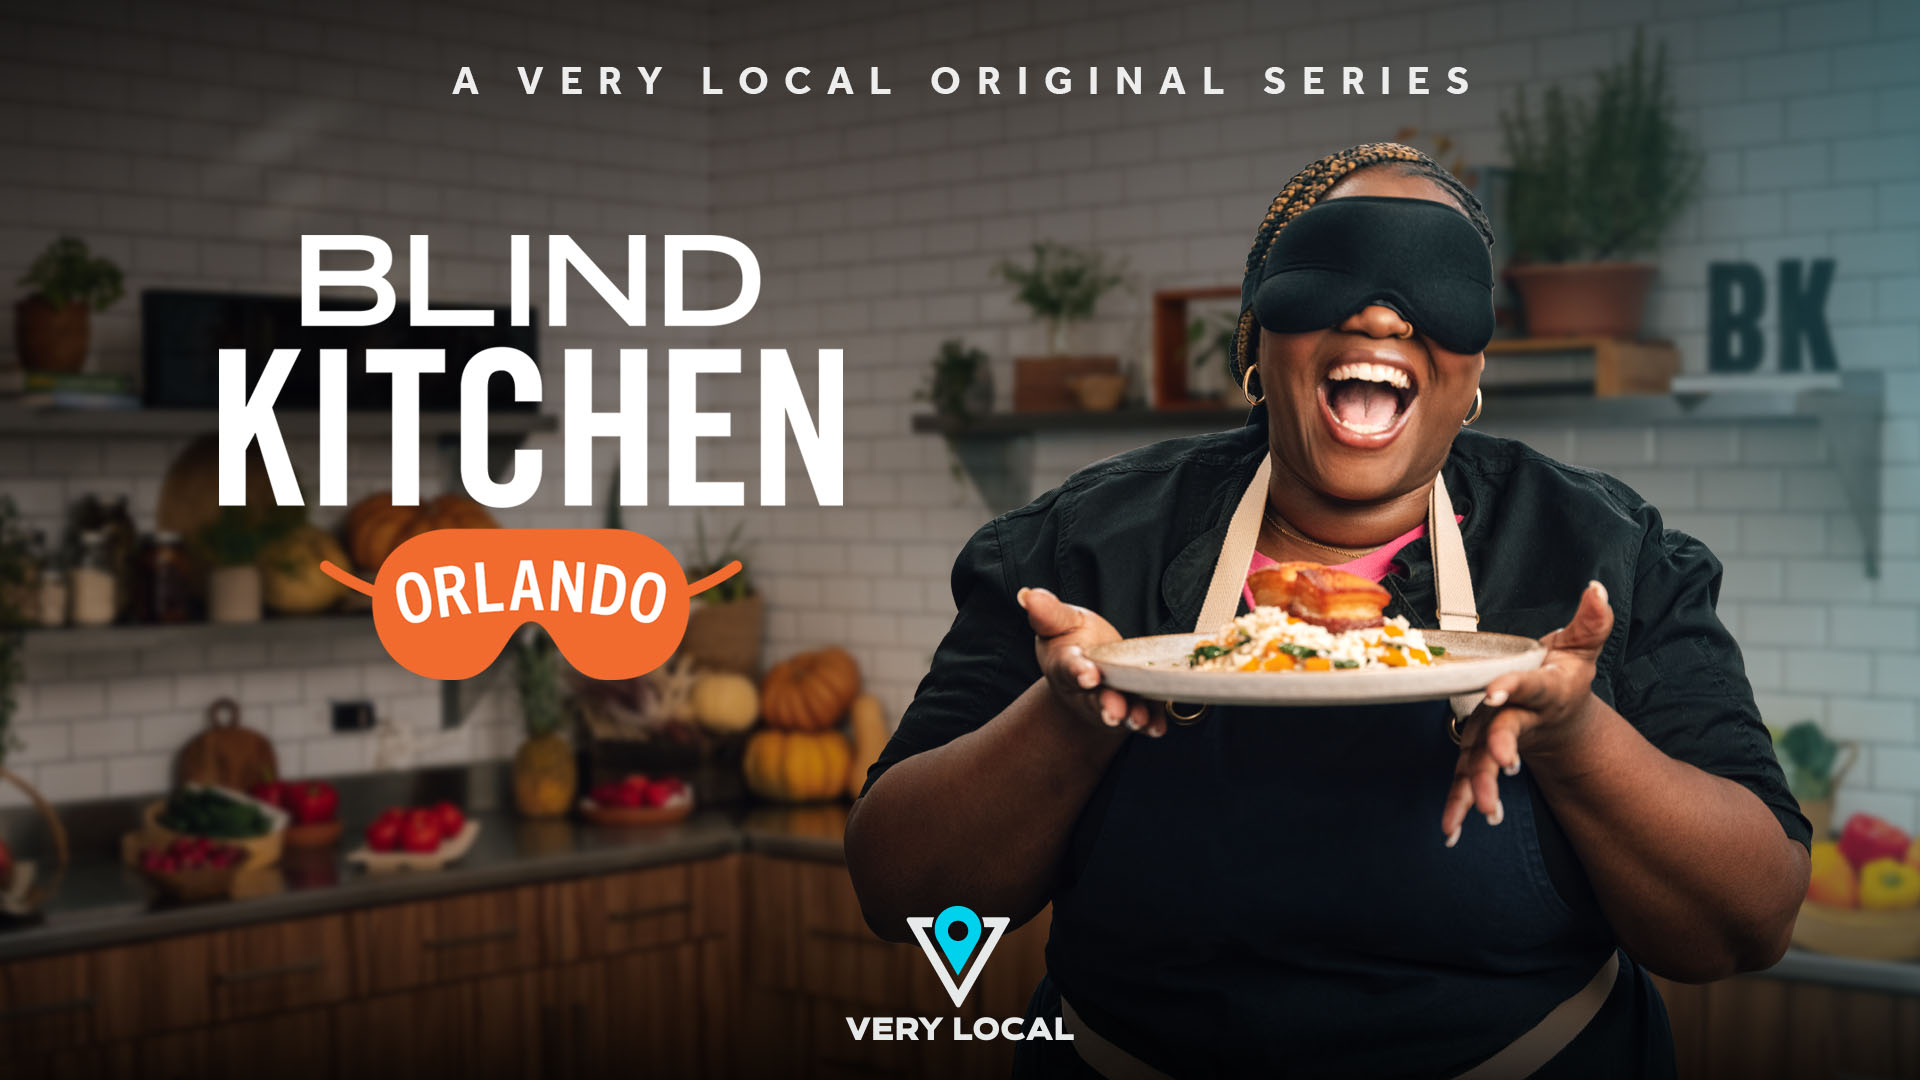 Stream the all new Very Local Original Series, Blind Kitchen Orlando premiering on October 11th. 